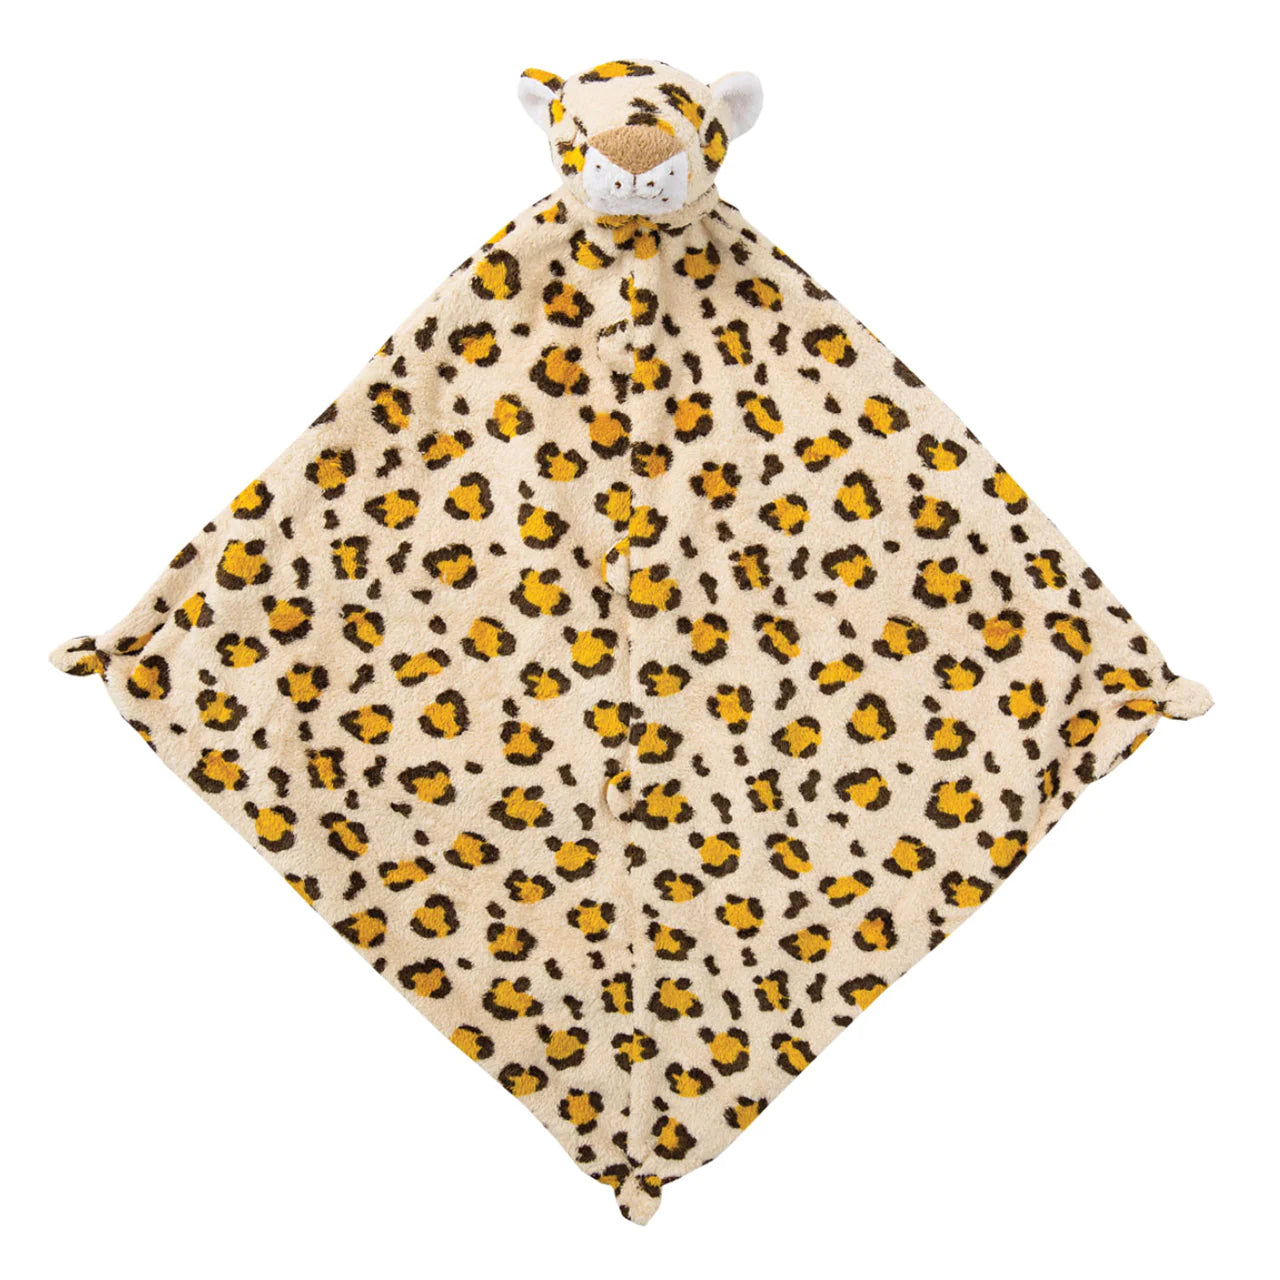 Load image into Gallery viewer, Leopard Blankie
